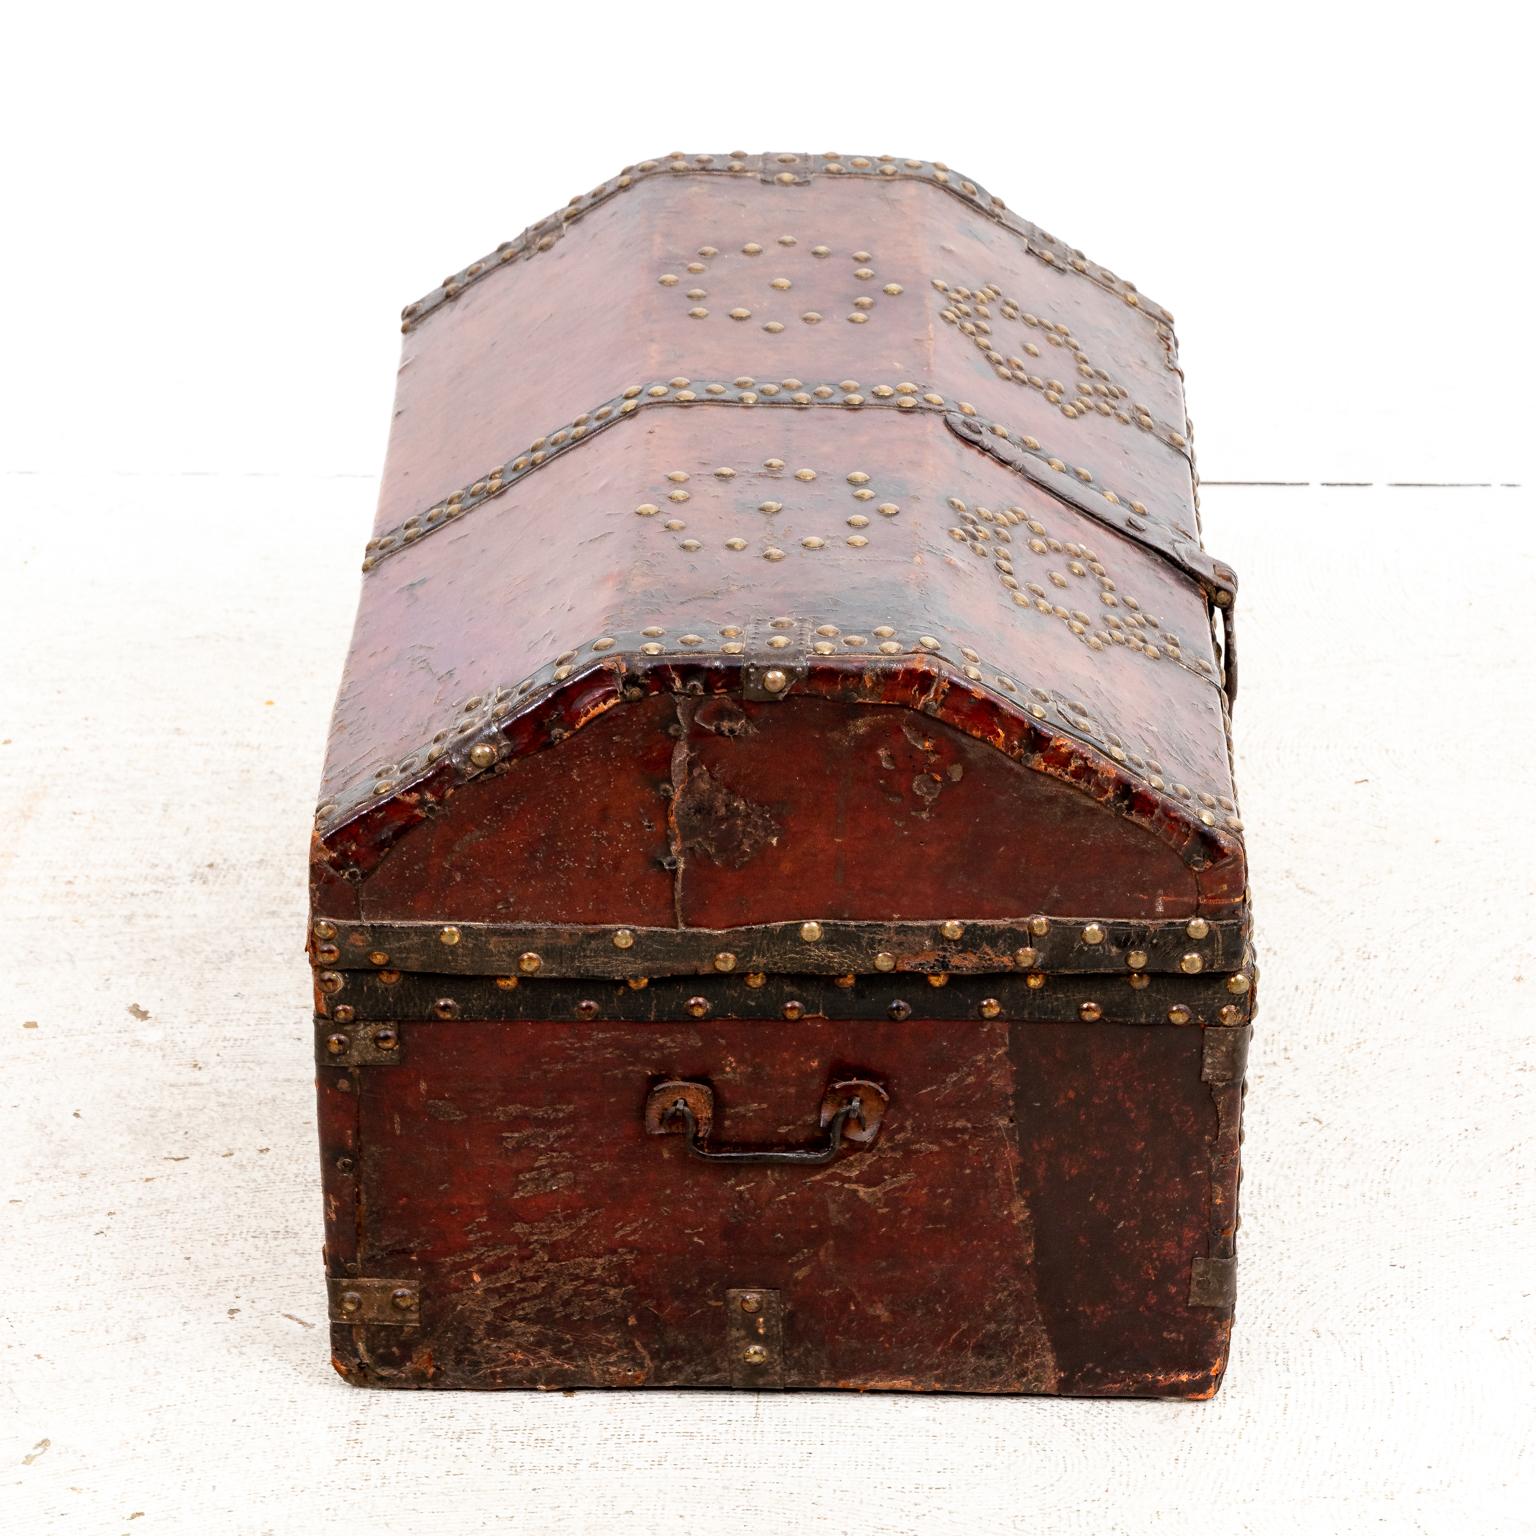 Circa 18th century Spanish leather trunk with two side handles decorated throughout with metal nail head trim and constructed with metal hardware. The piece features metal nail head designs including octagonal patterns on the lid and round oval